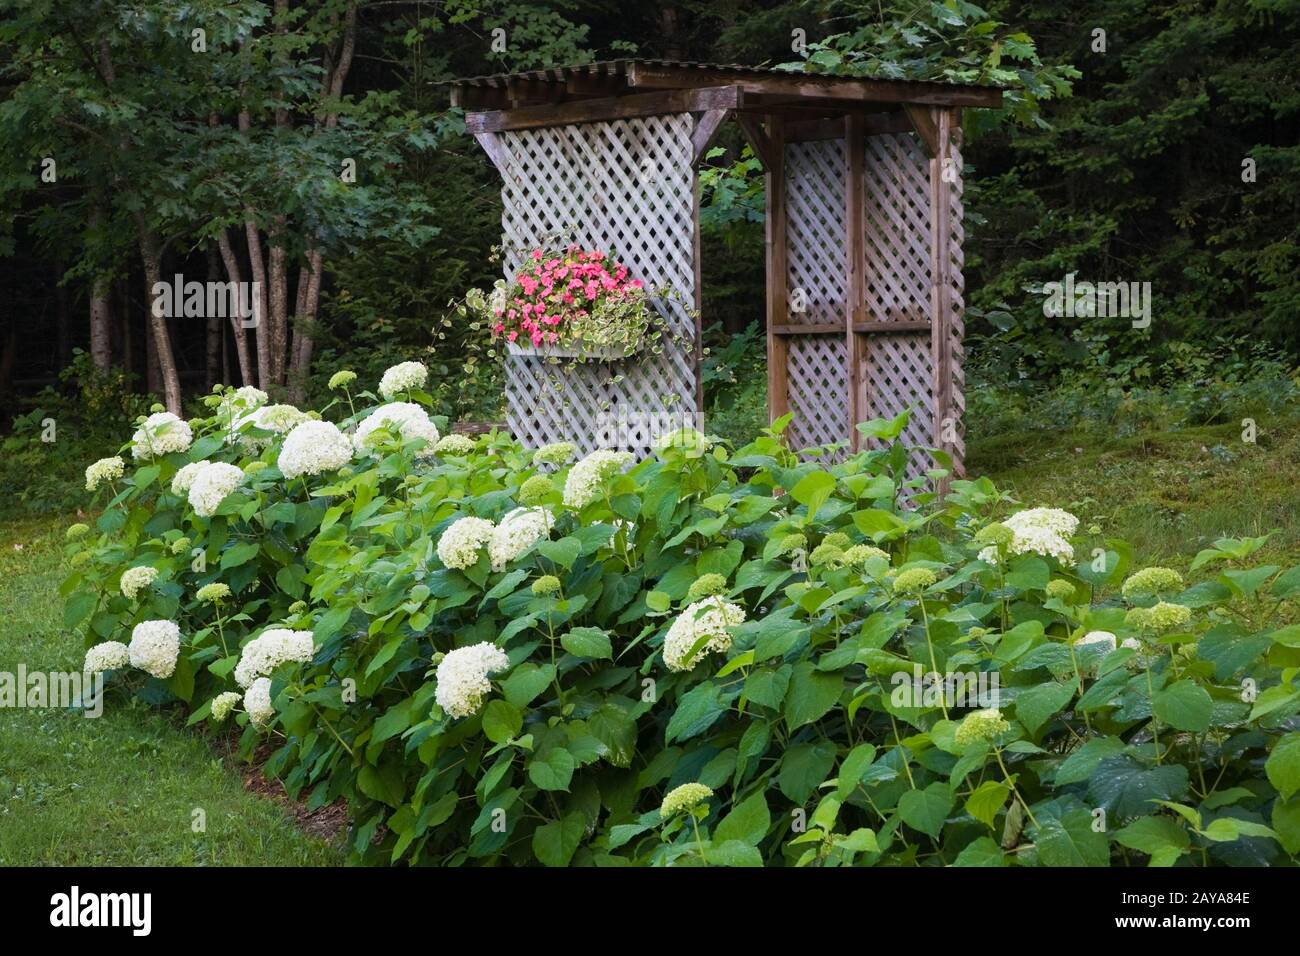 White Hydrangea 'Annabelle' flowers with wooden lattice arbour decorated with box of planted pink Impatiens and Quercus - Oak Trees in backyard garden Stock Photo